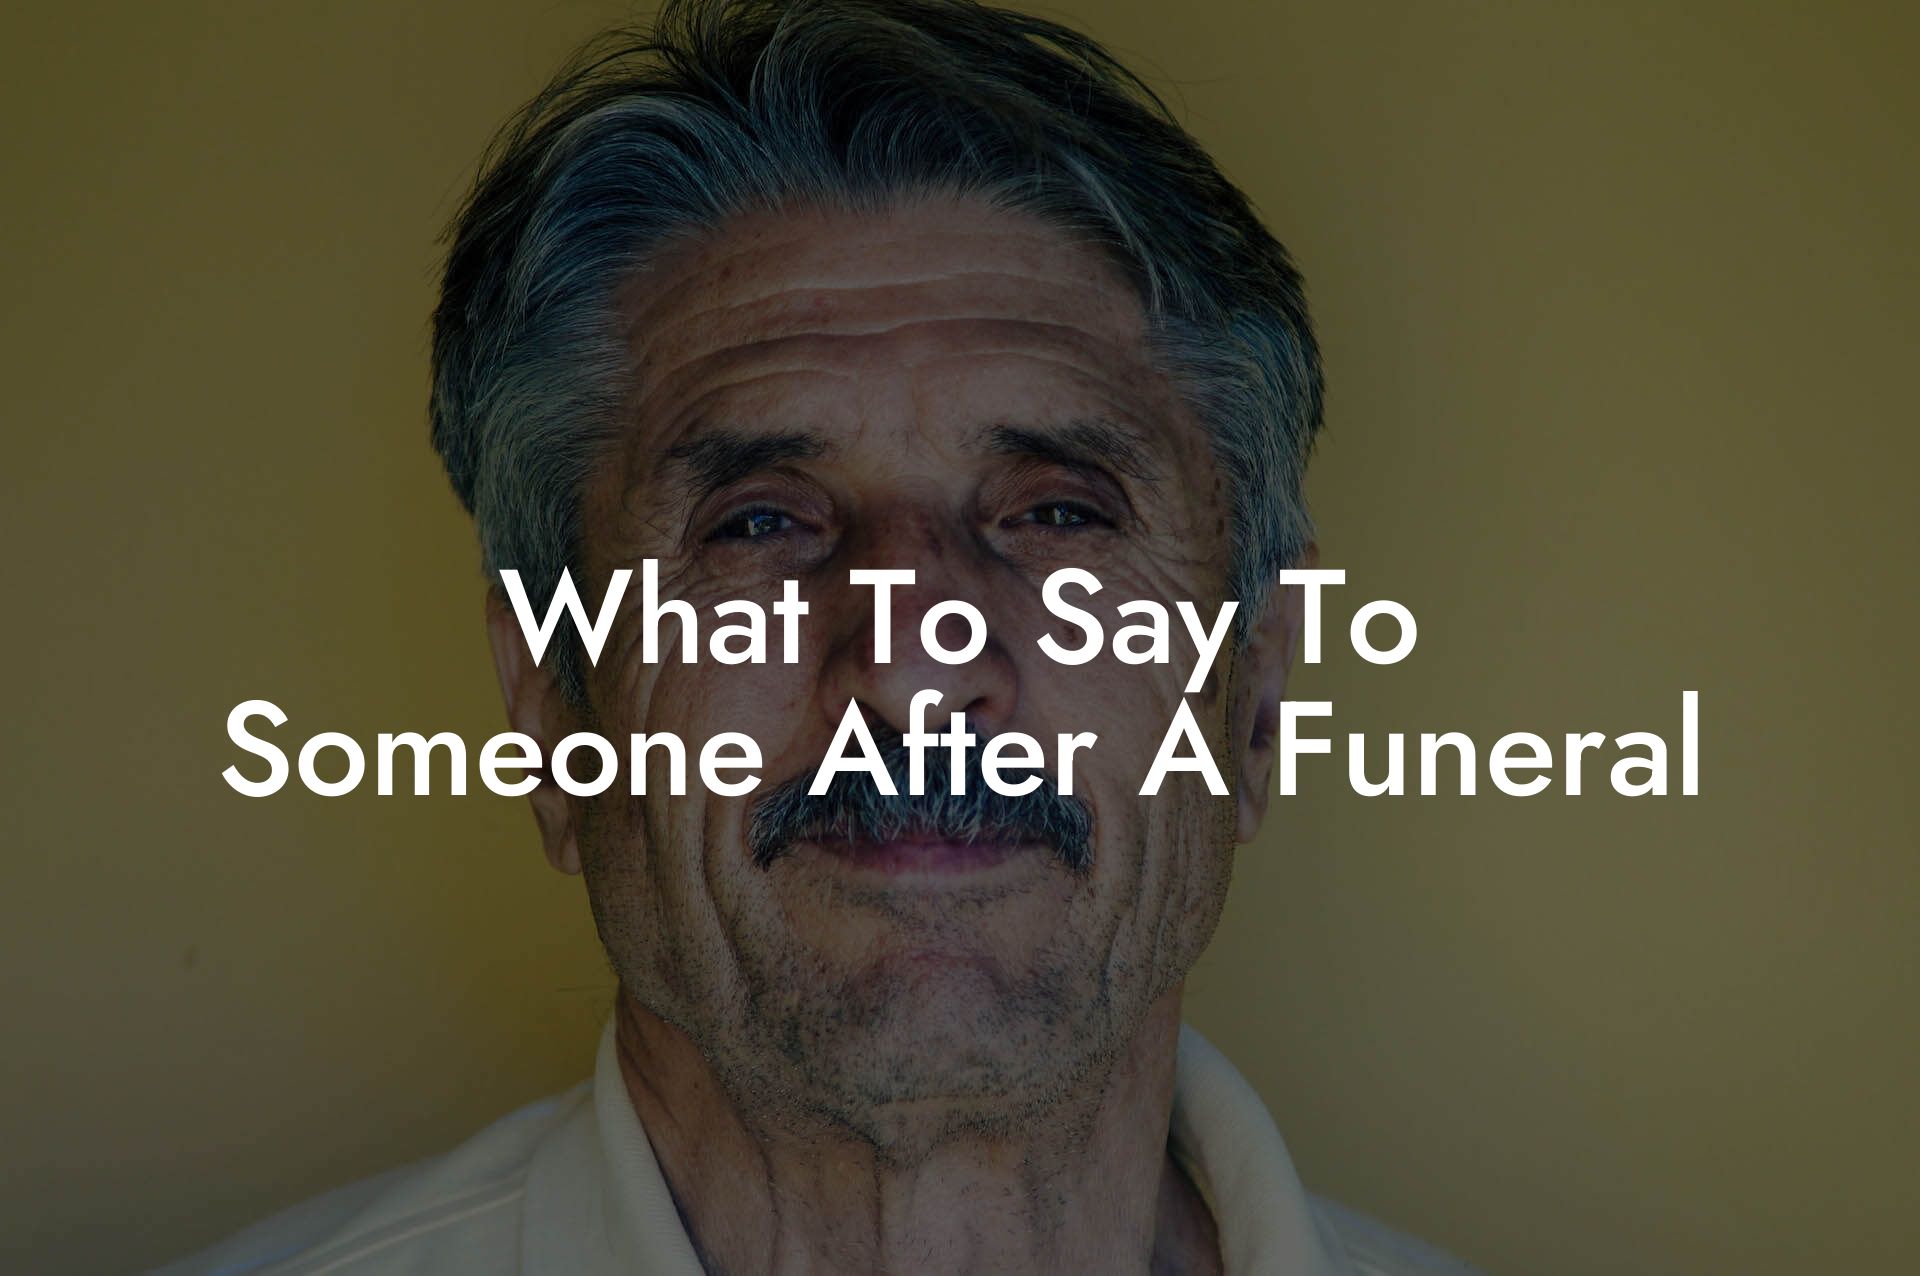 What To Say To Someone After A Funeral